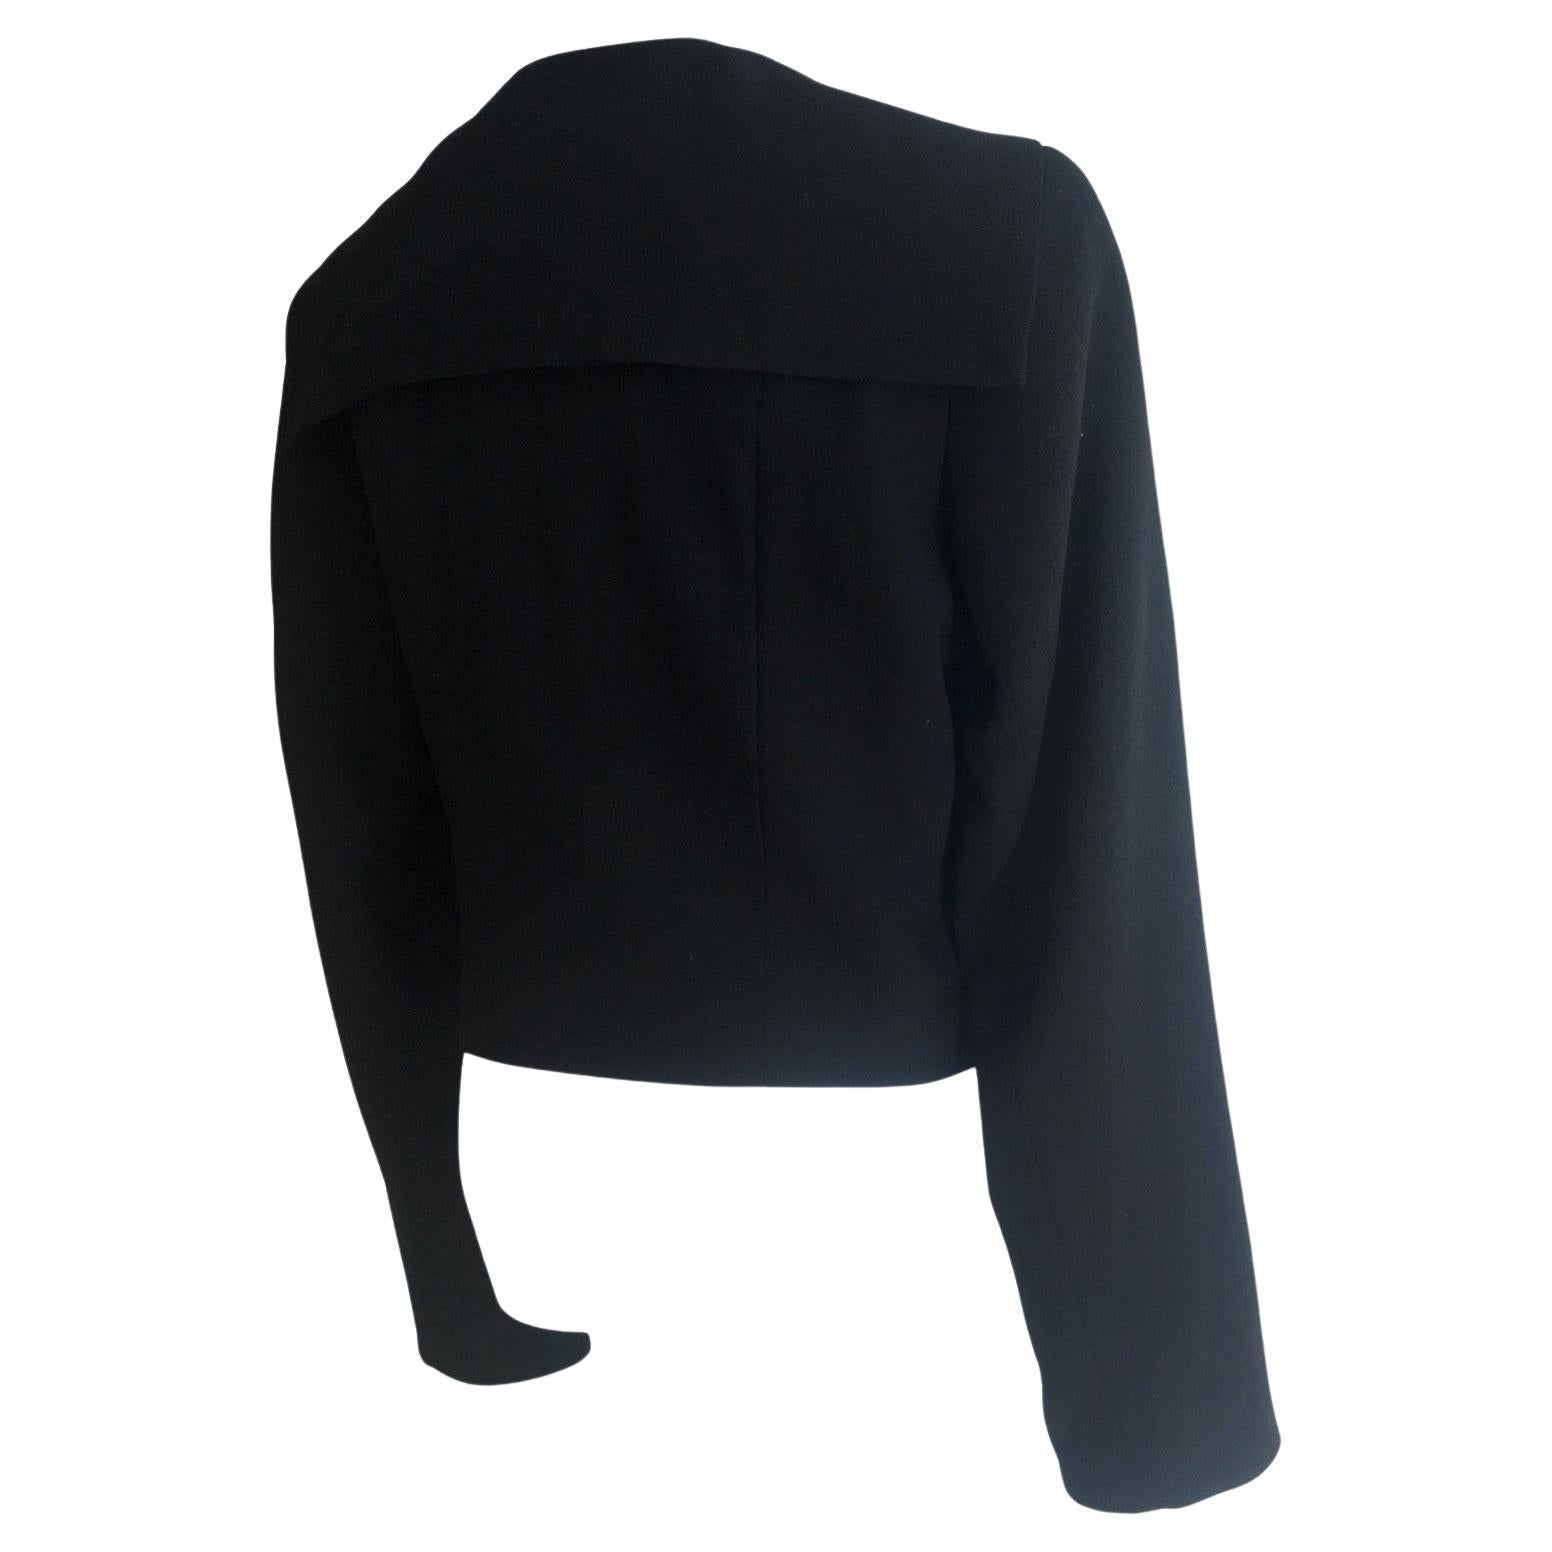 CHANEL black thin wool sailor collar jacket from circa AW2003.
One button front closure. Made in France.

Material: Laine wool 100%
Lining material: 100 % Silk
Jacket size: circa 36 EU / 6 US

Shoulder width (approx.): 42 cm
Back length (approx.):